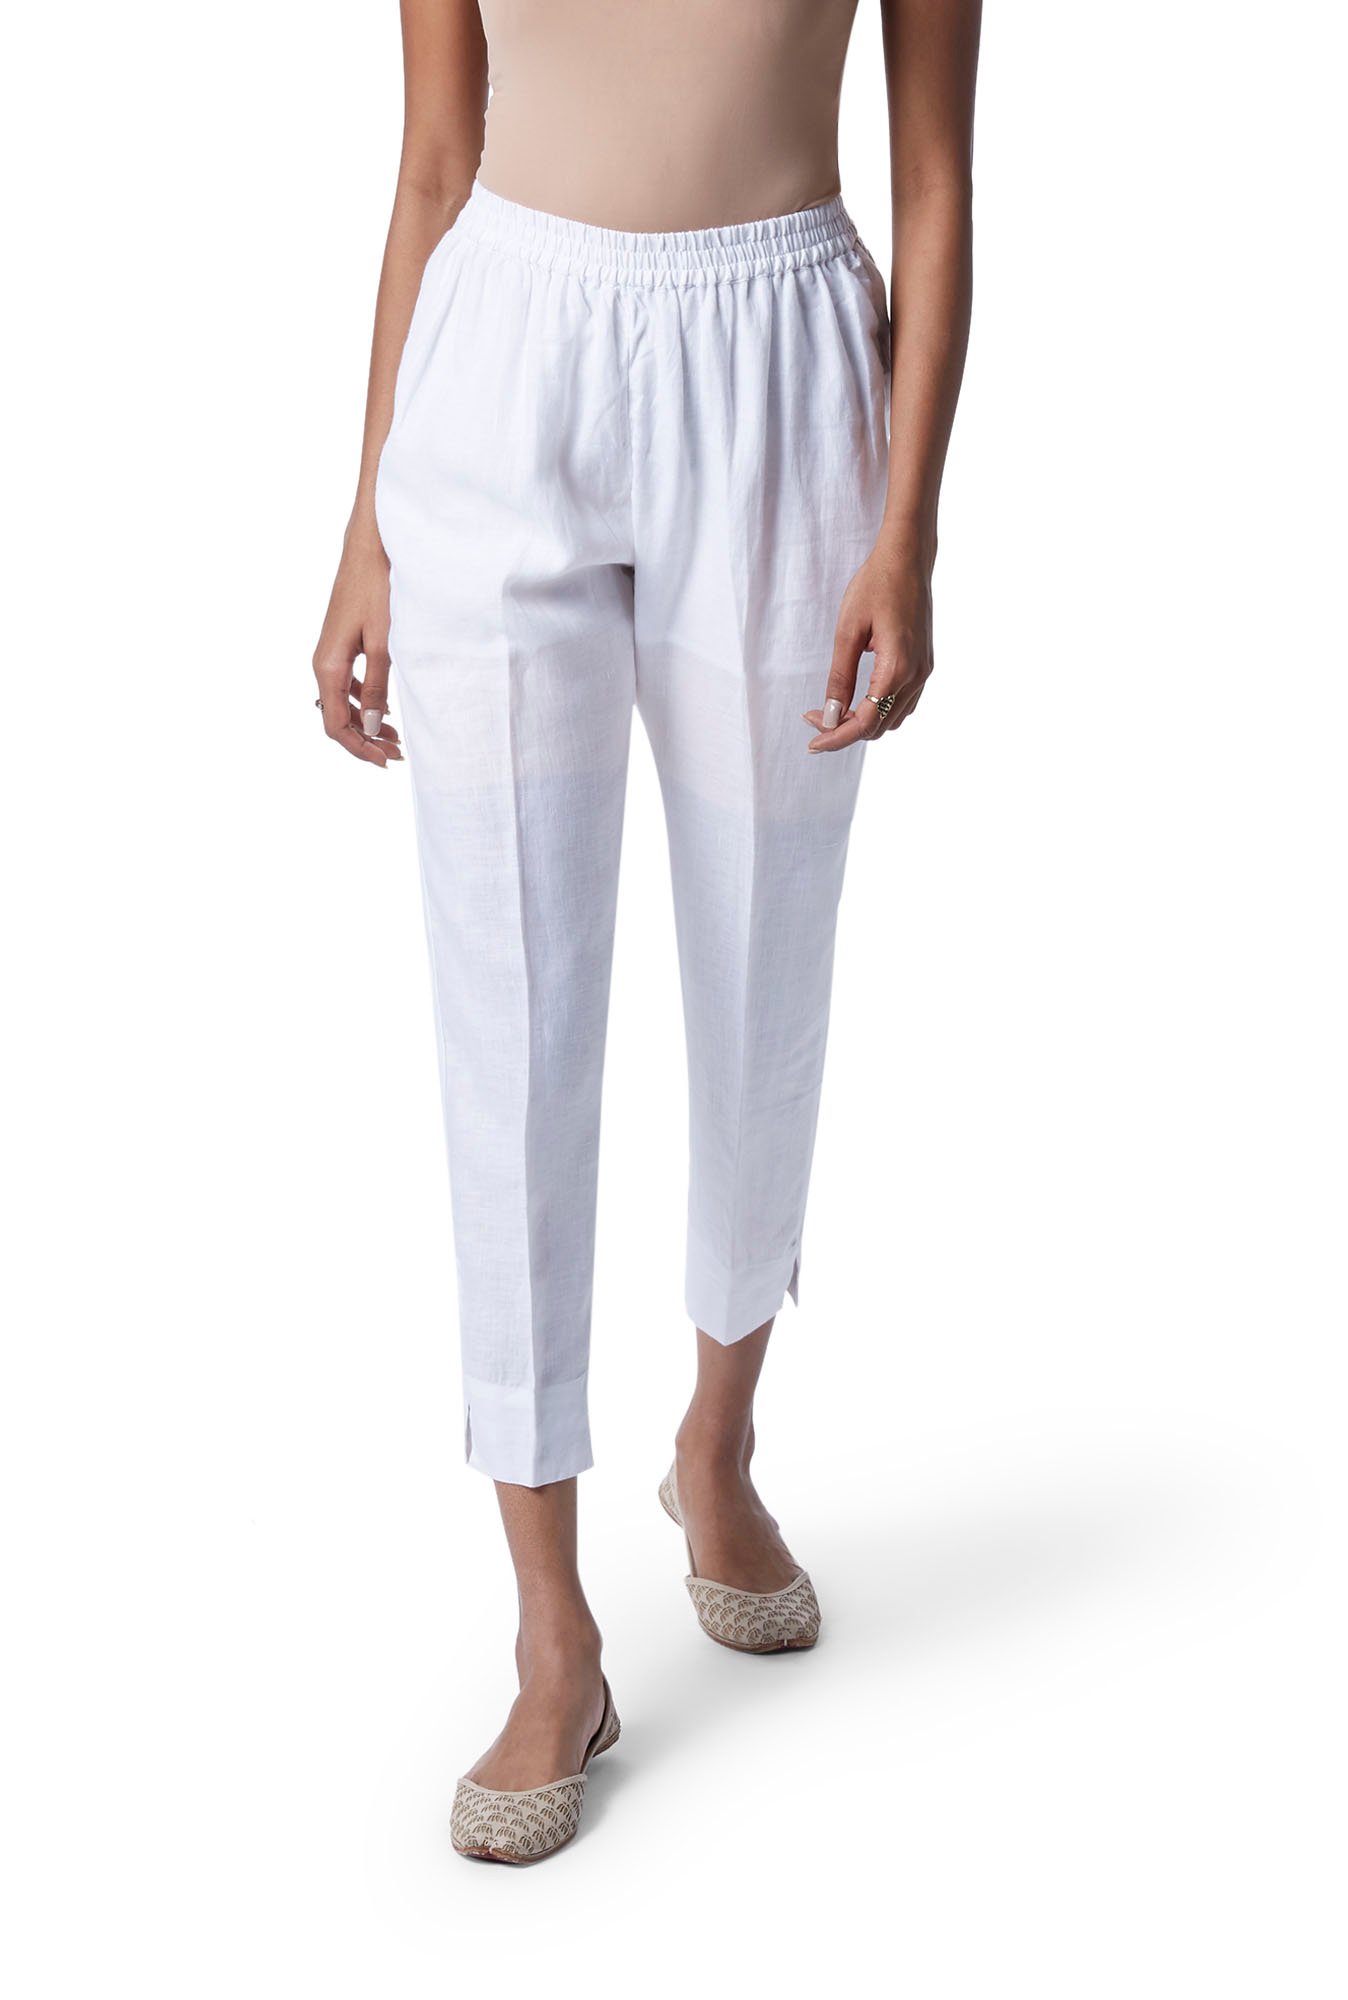 White Embroidered Pants  Selling Fast at Pantaloonscom